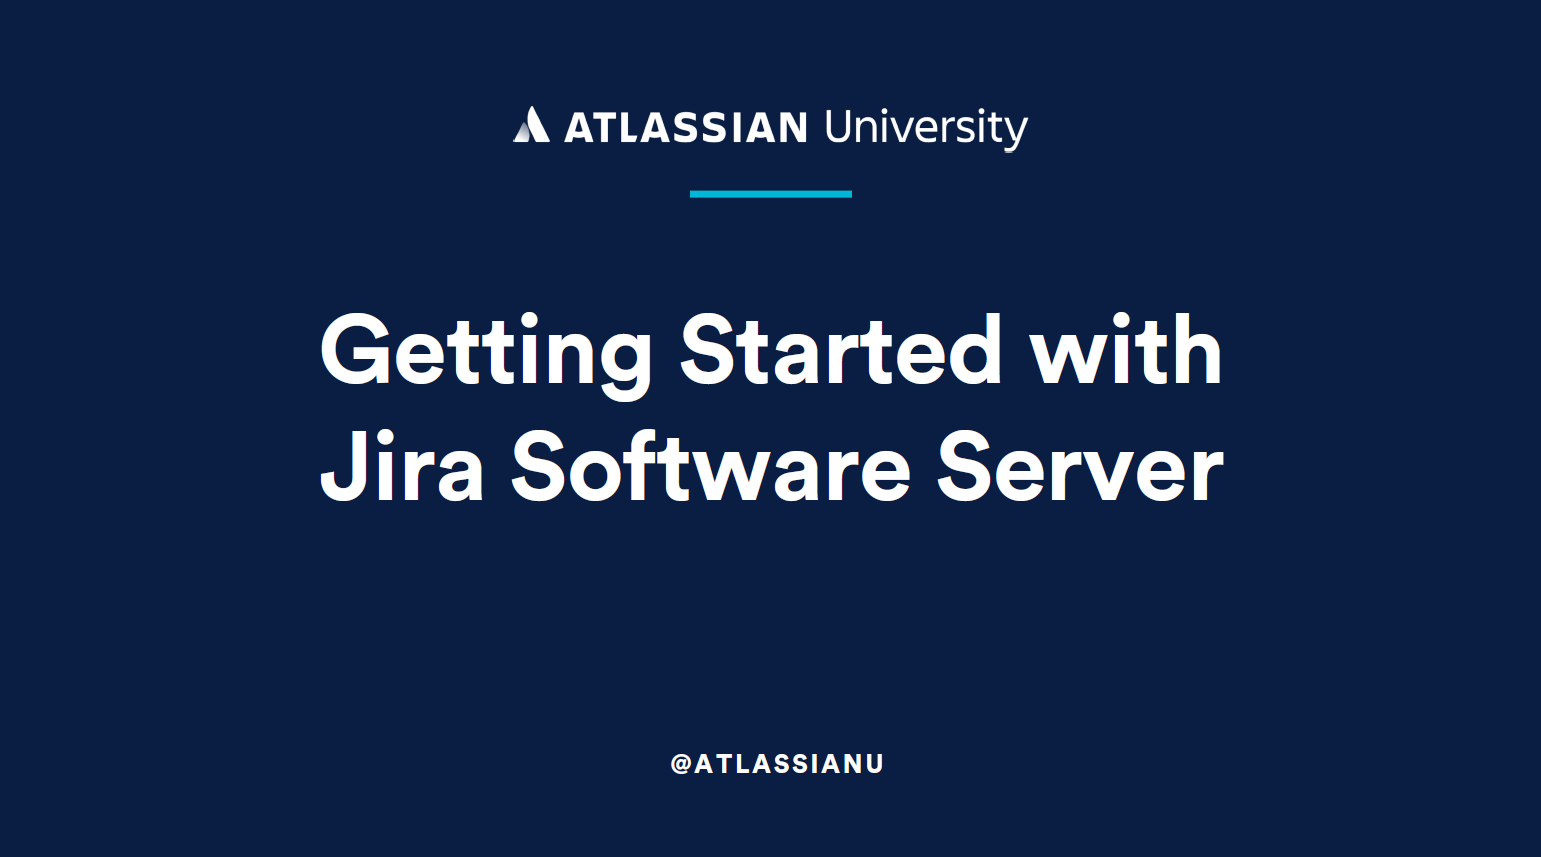 Getting Started with Jira Software Server (2)